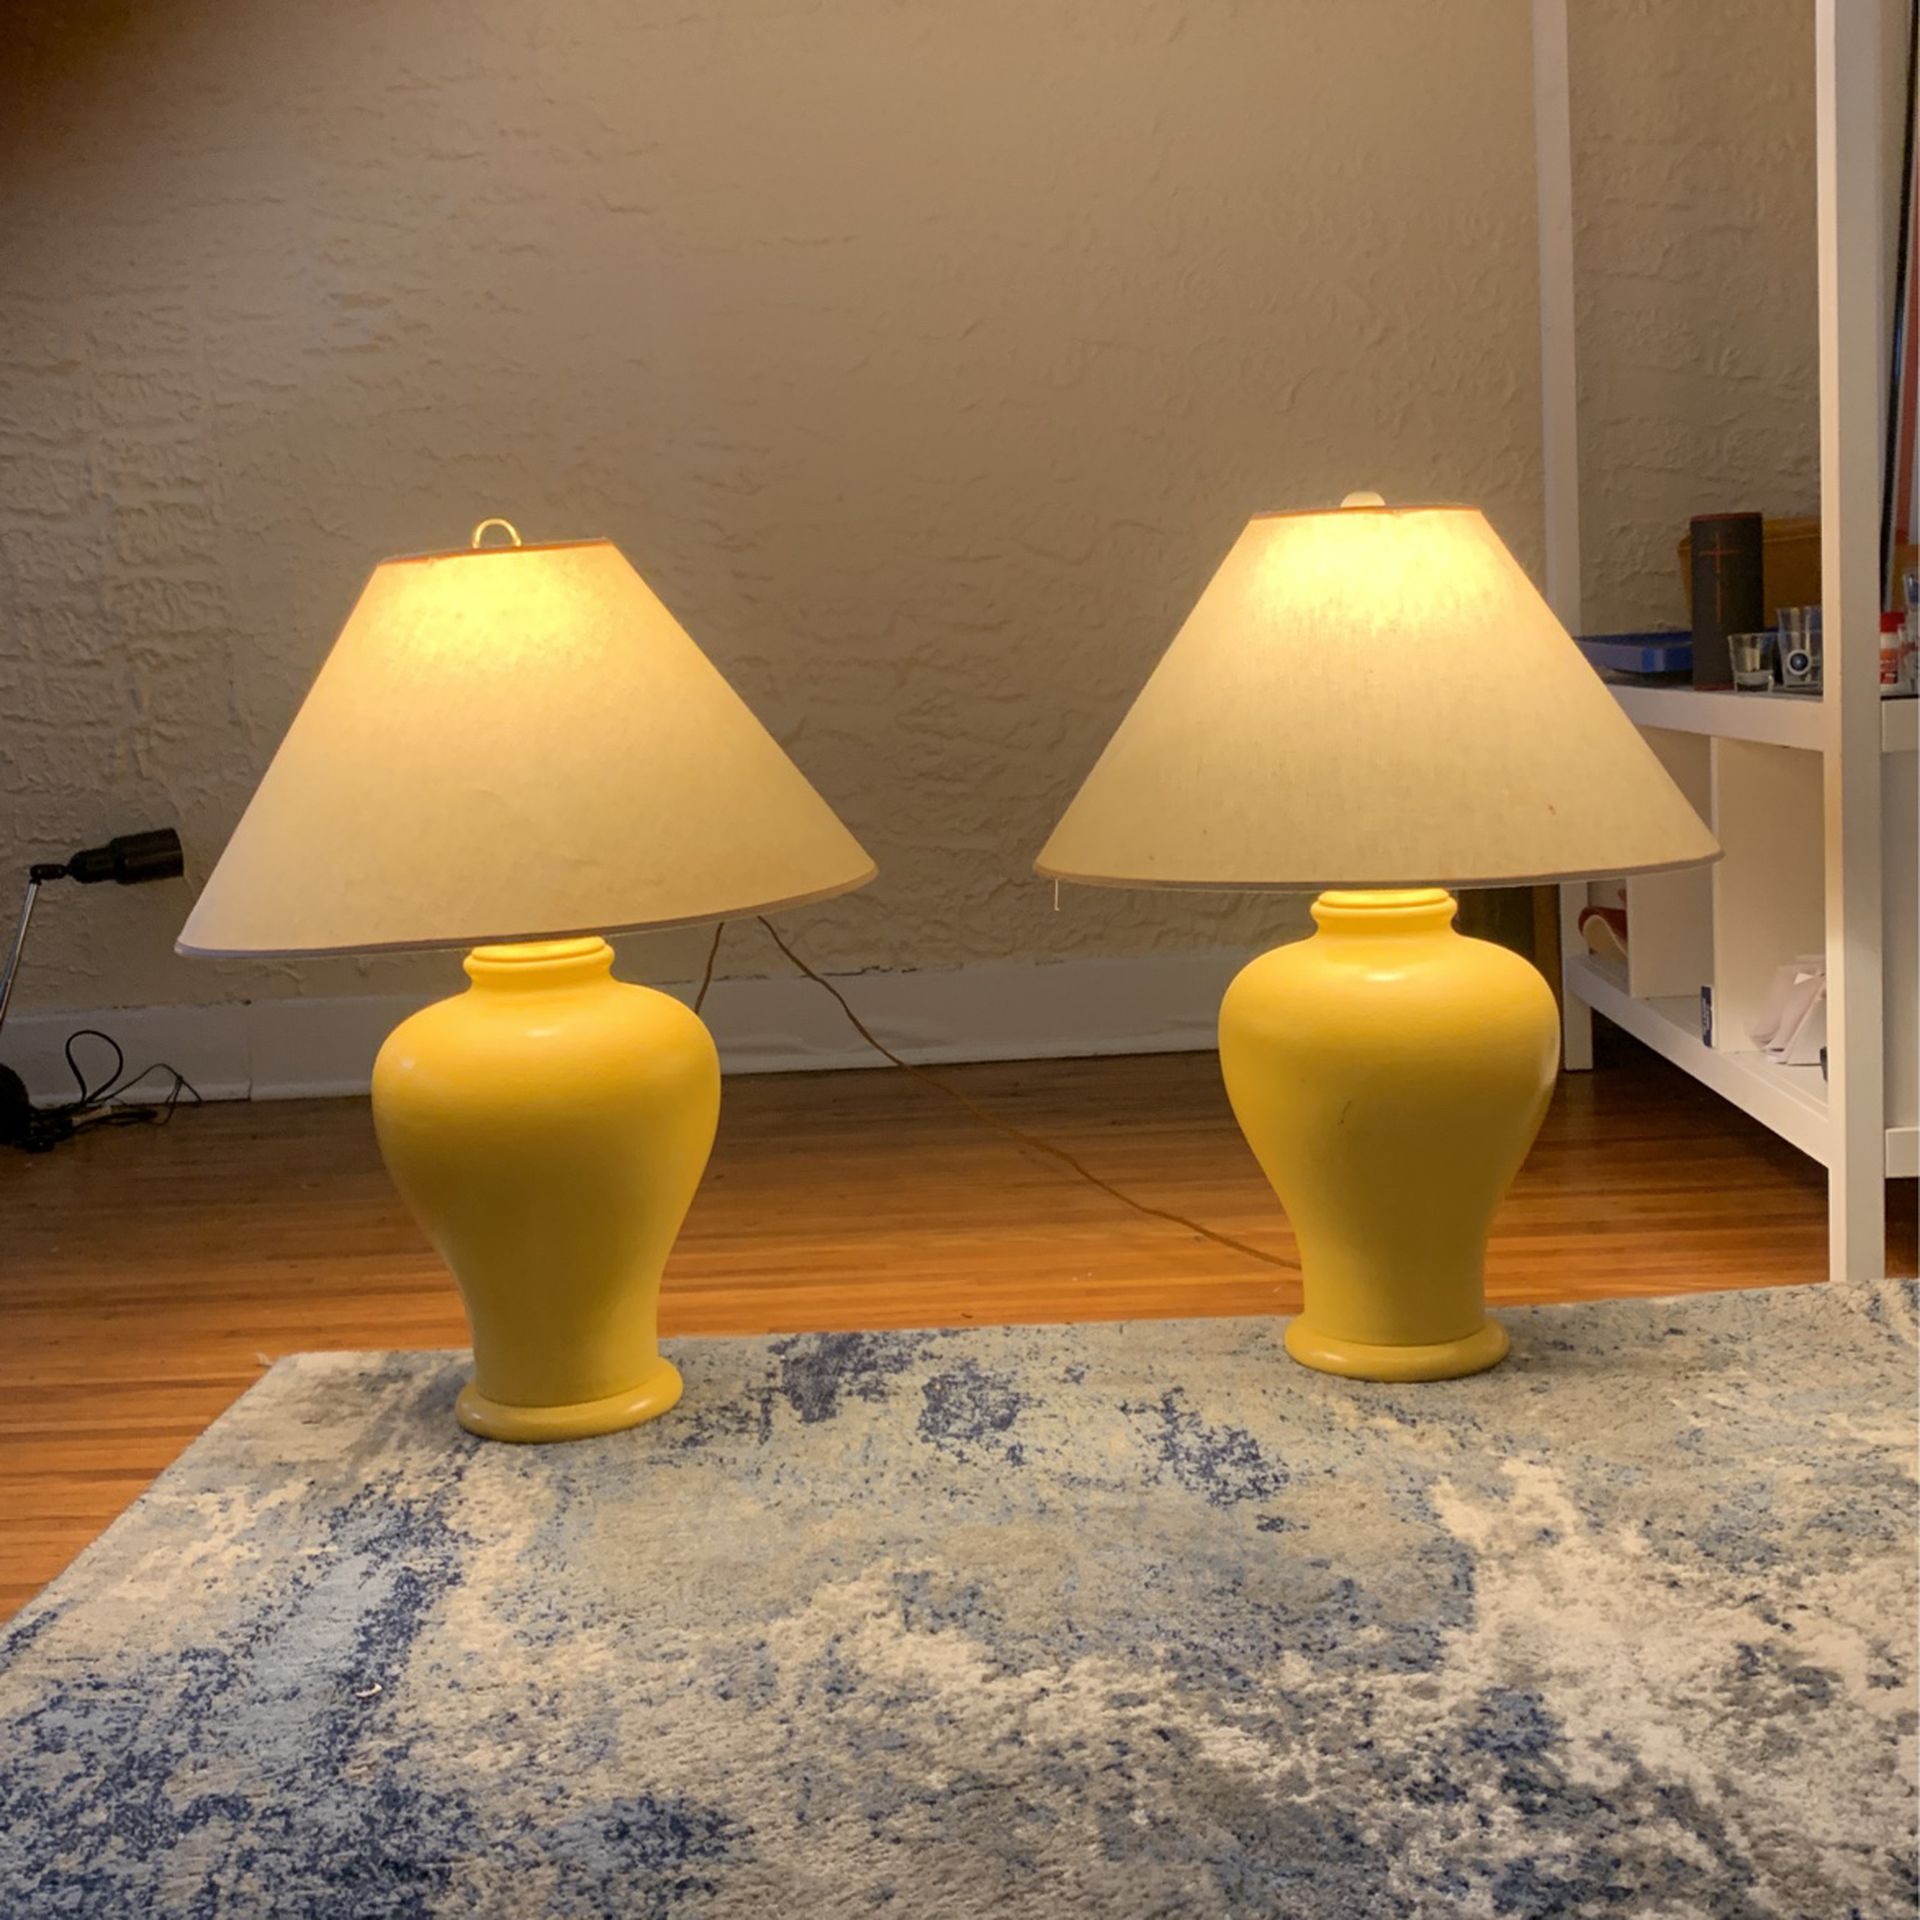 GORGEOUS MCM STYLE OLD SCHOOL HOLLYWOOD  MOVIE VIBE CITRUS YELLOW END TABLE LAMPS 30 “HIGH CERAMIC MUTED FINISH 